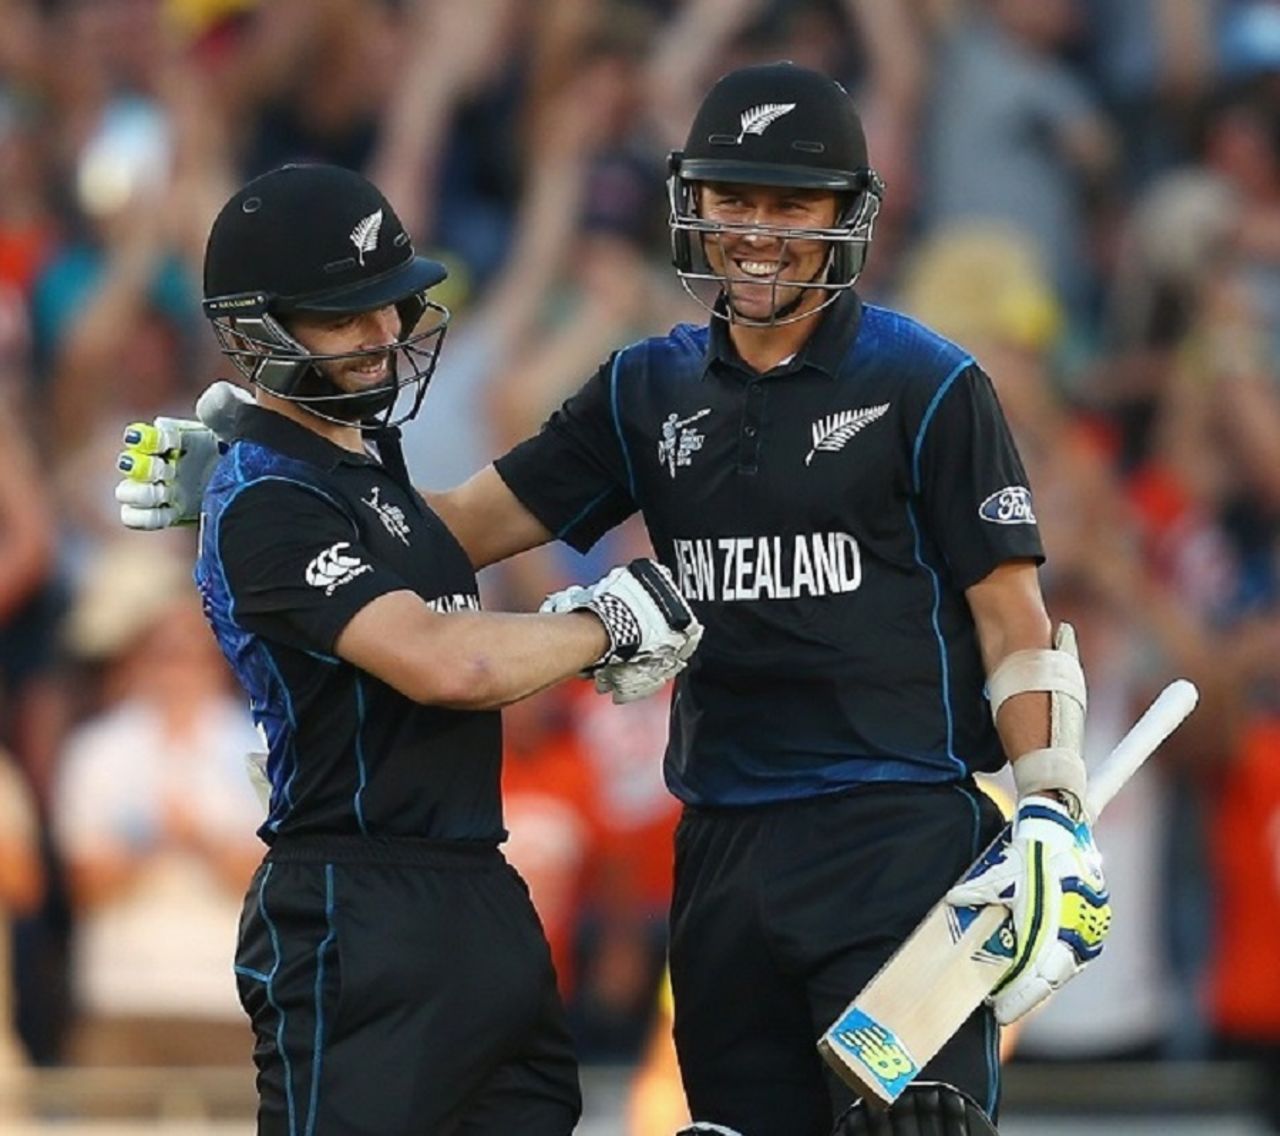 Kane Williamson is embraced by Trent Boult after sealing the nervy chase with a six, New Zealand v Australia, World Cup 2015, Group A, Auckland, February 28, 2015